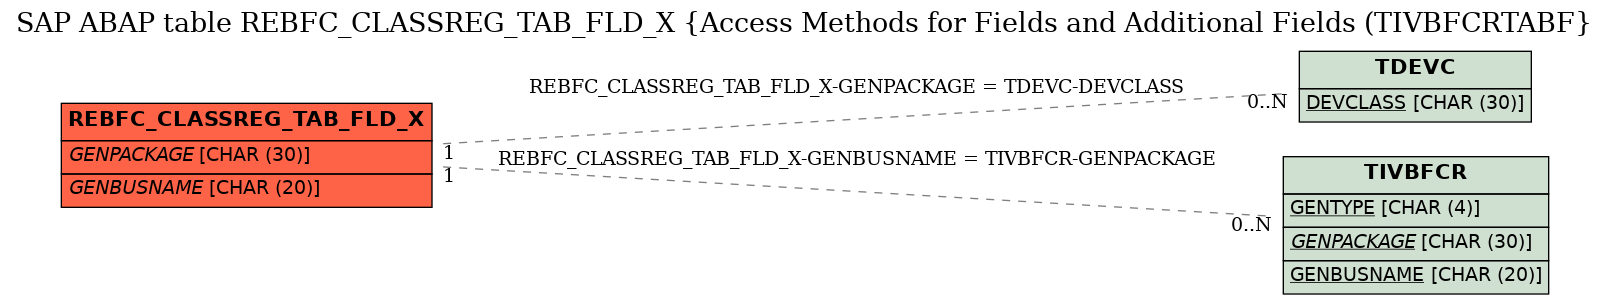 E-R Diagram for table REBFC_CLASSREG_TAB_FLD_X (Access Methods for Fields and Additional Fields (TIVBFCRTABF)